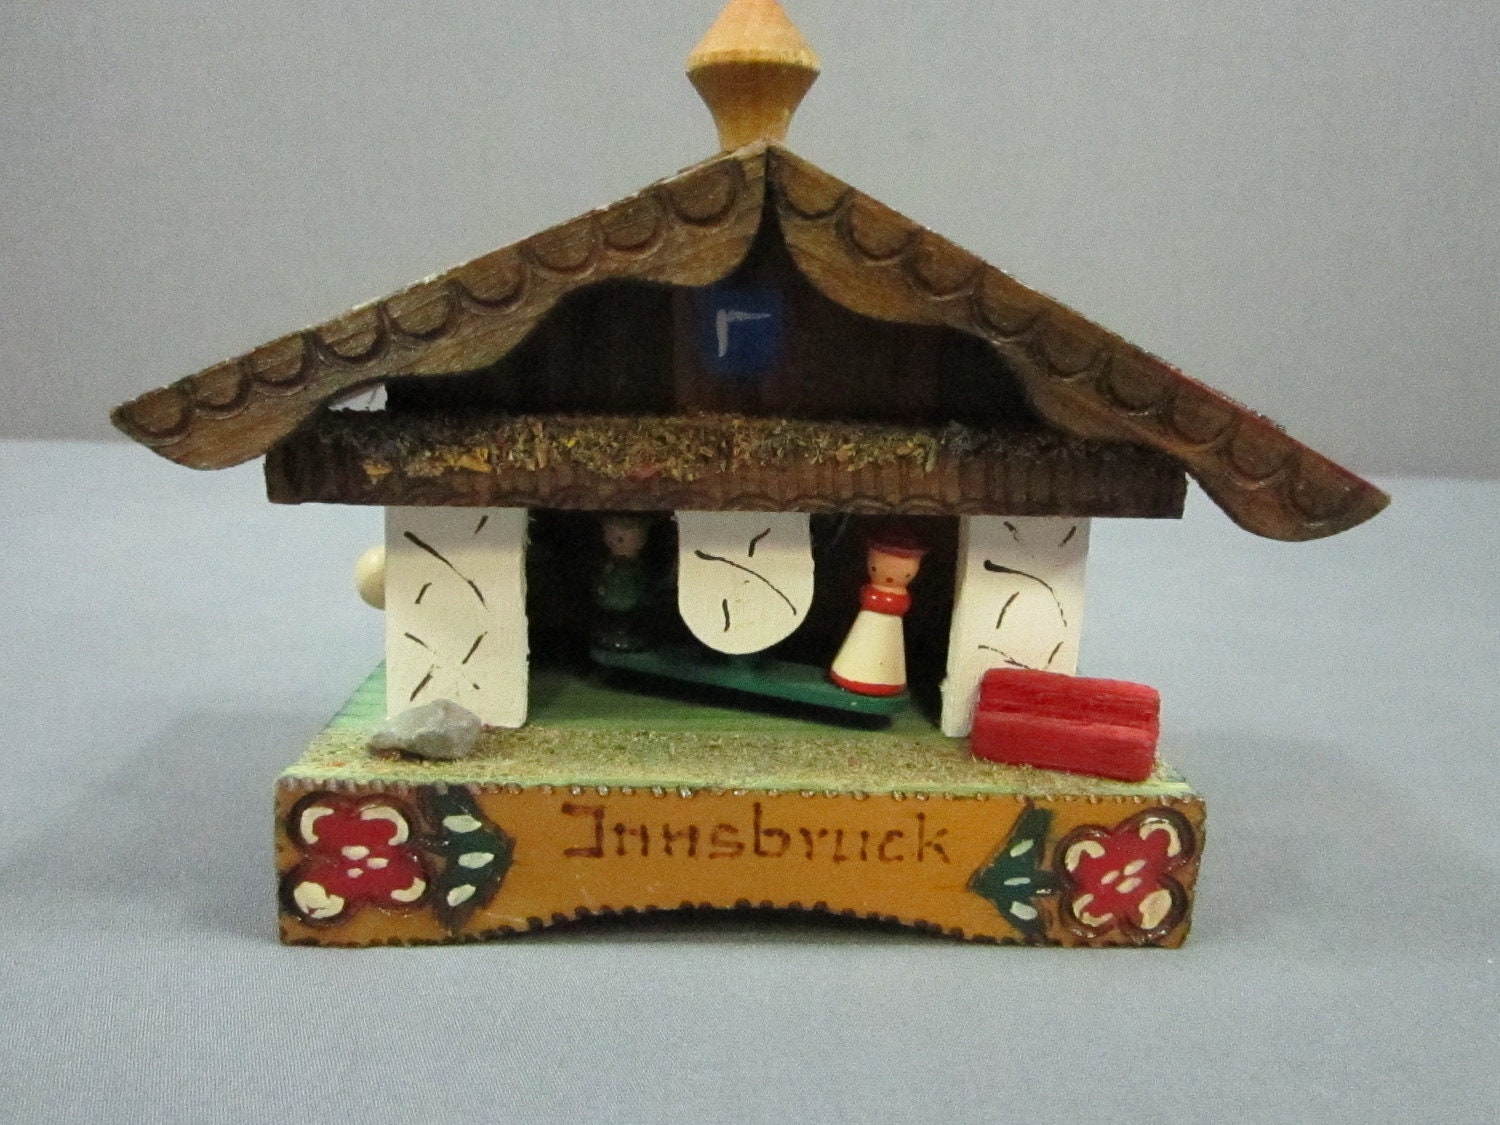 Innsbruck Wooden House Music Box With Little People That Spin FREE SHIP - DiverseCollectibles